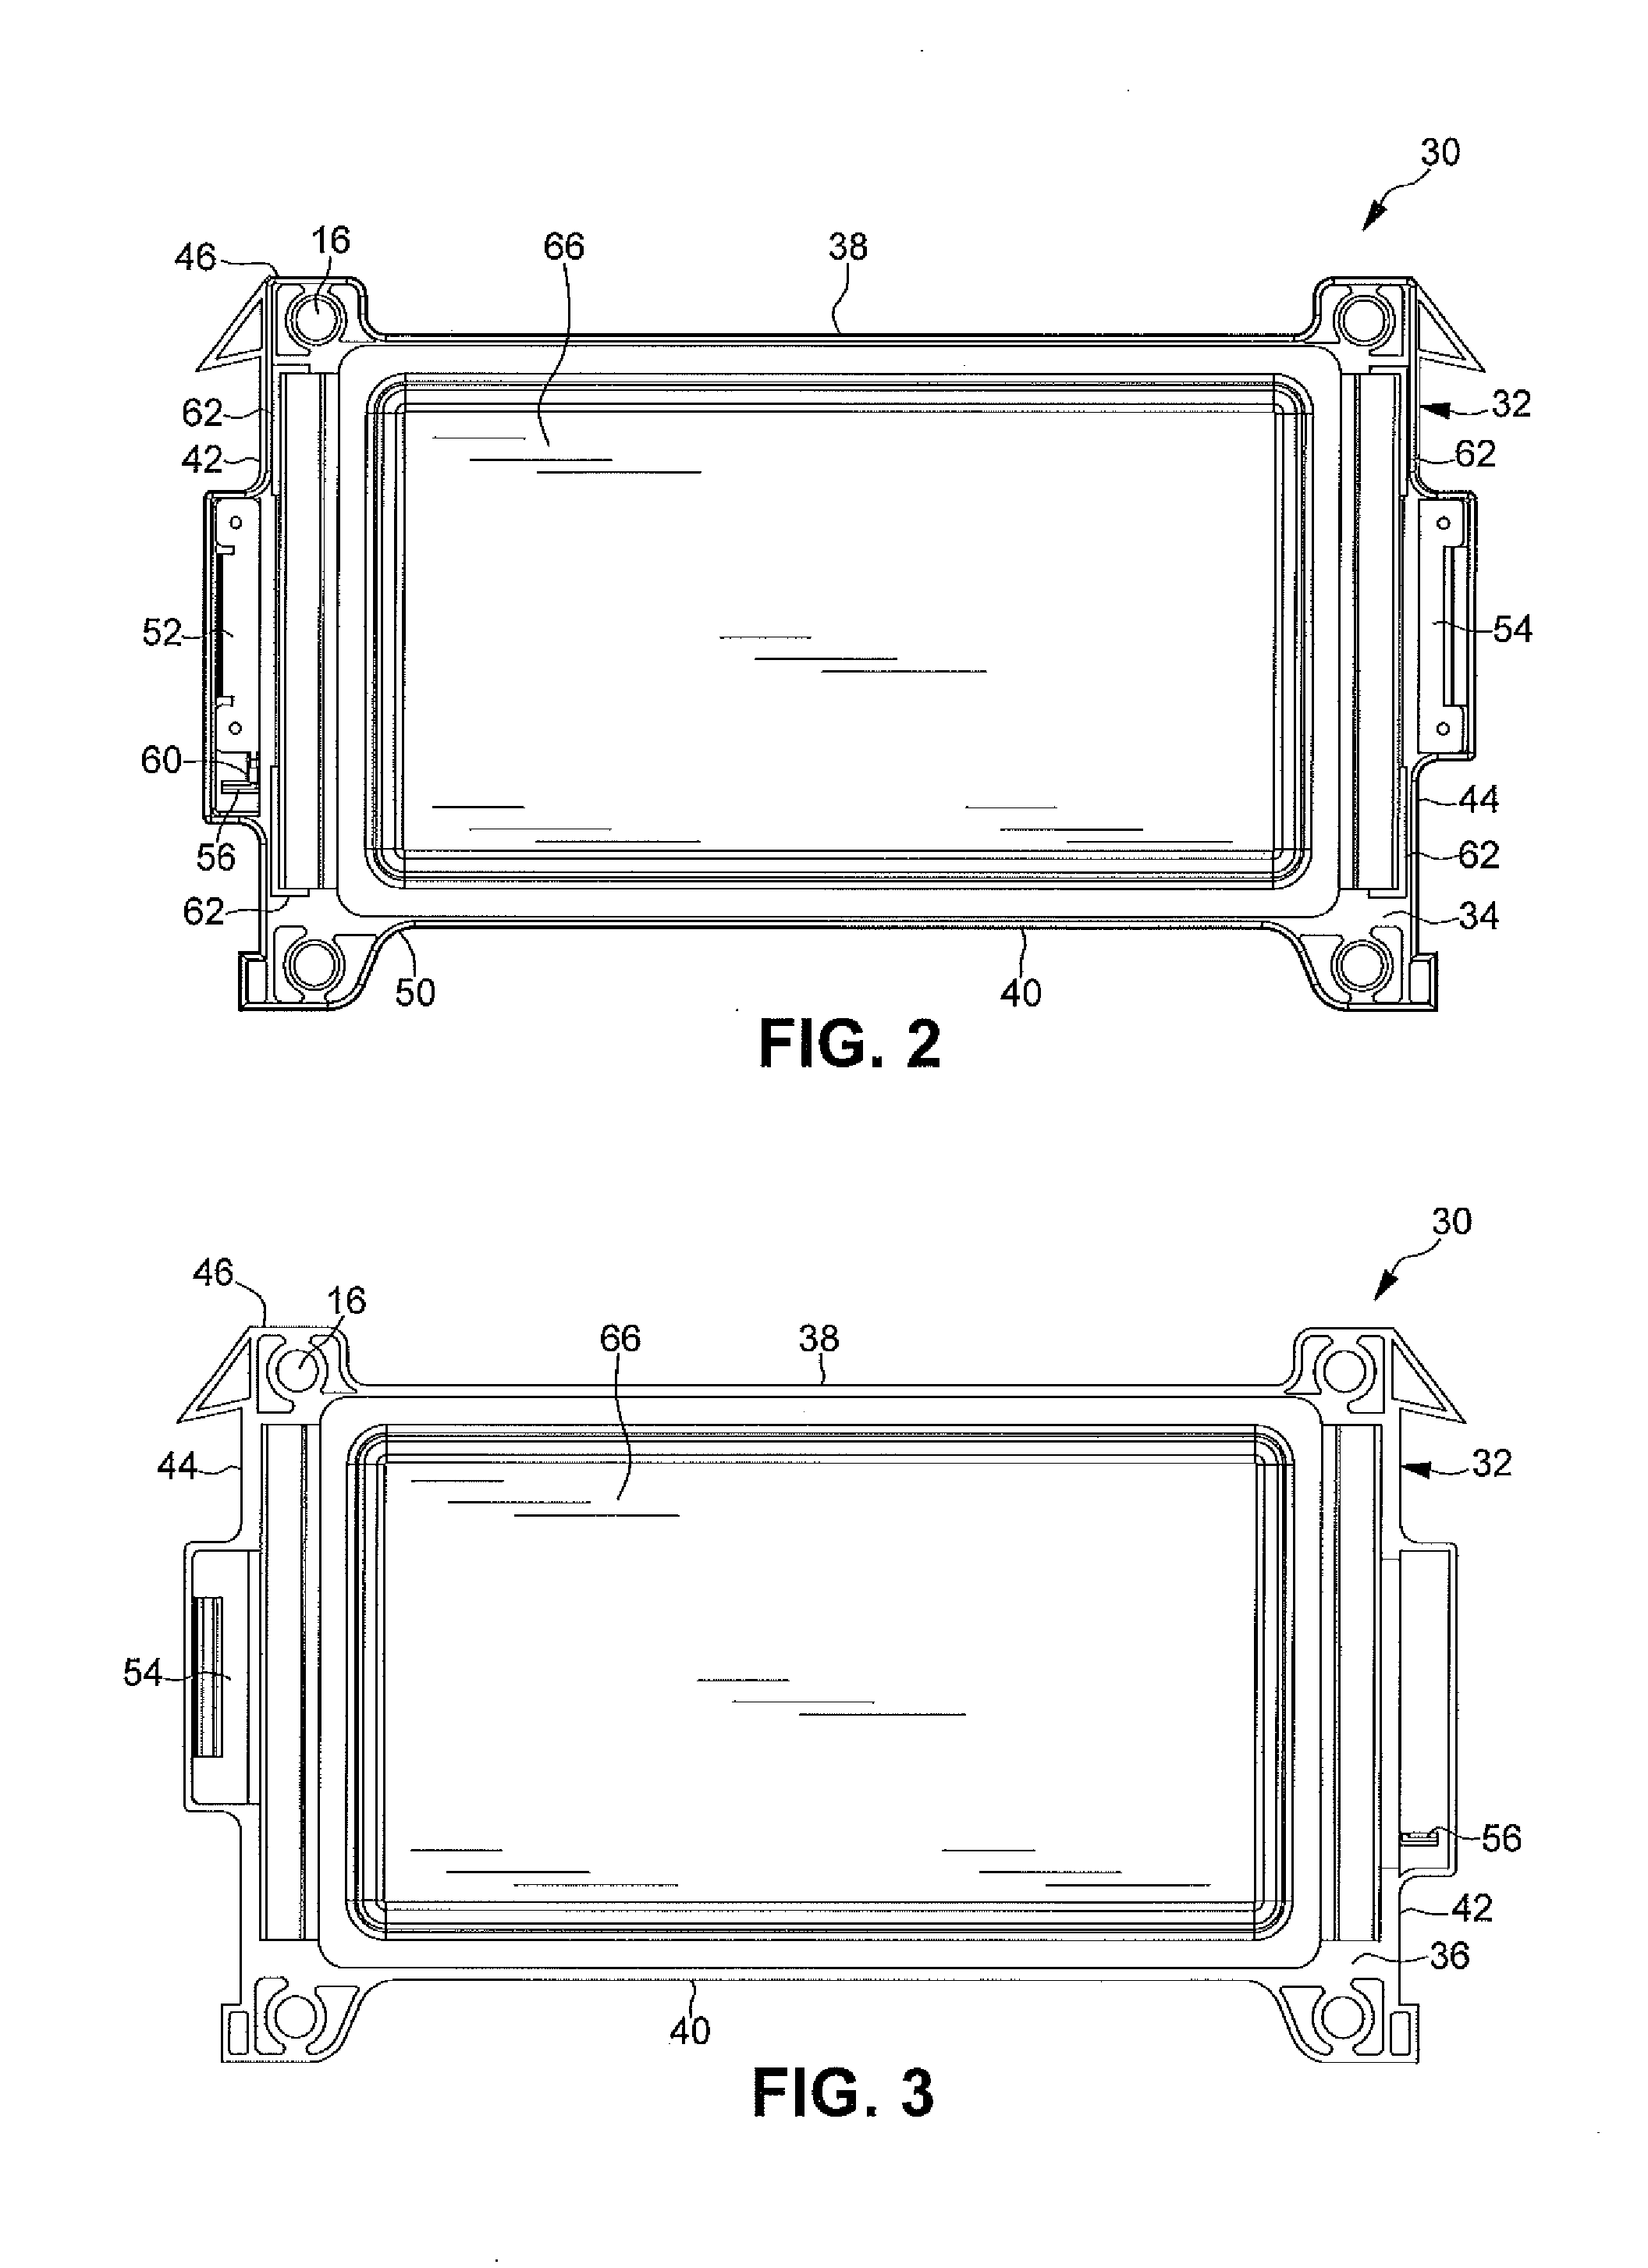 Repeating frame battery with joining of cell tabs via welded-on male and female slip-fit connectors